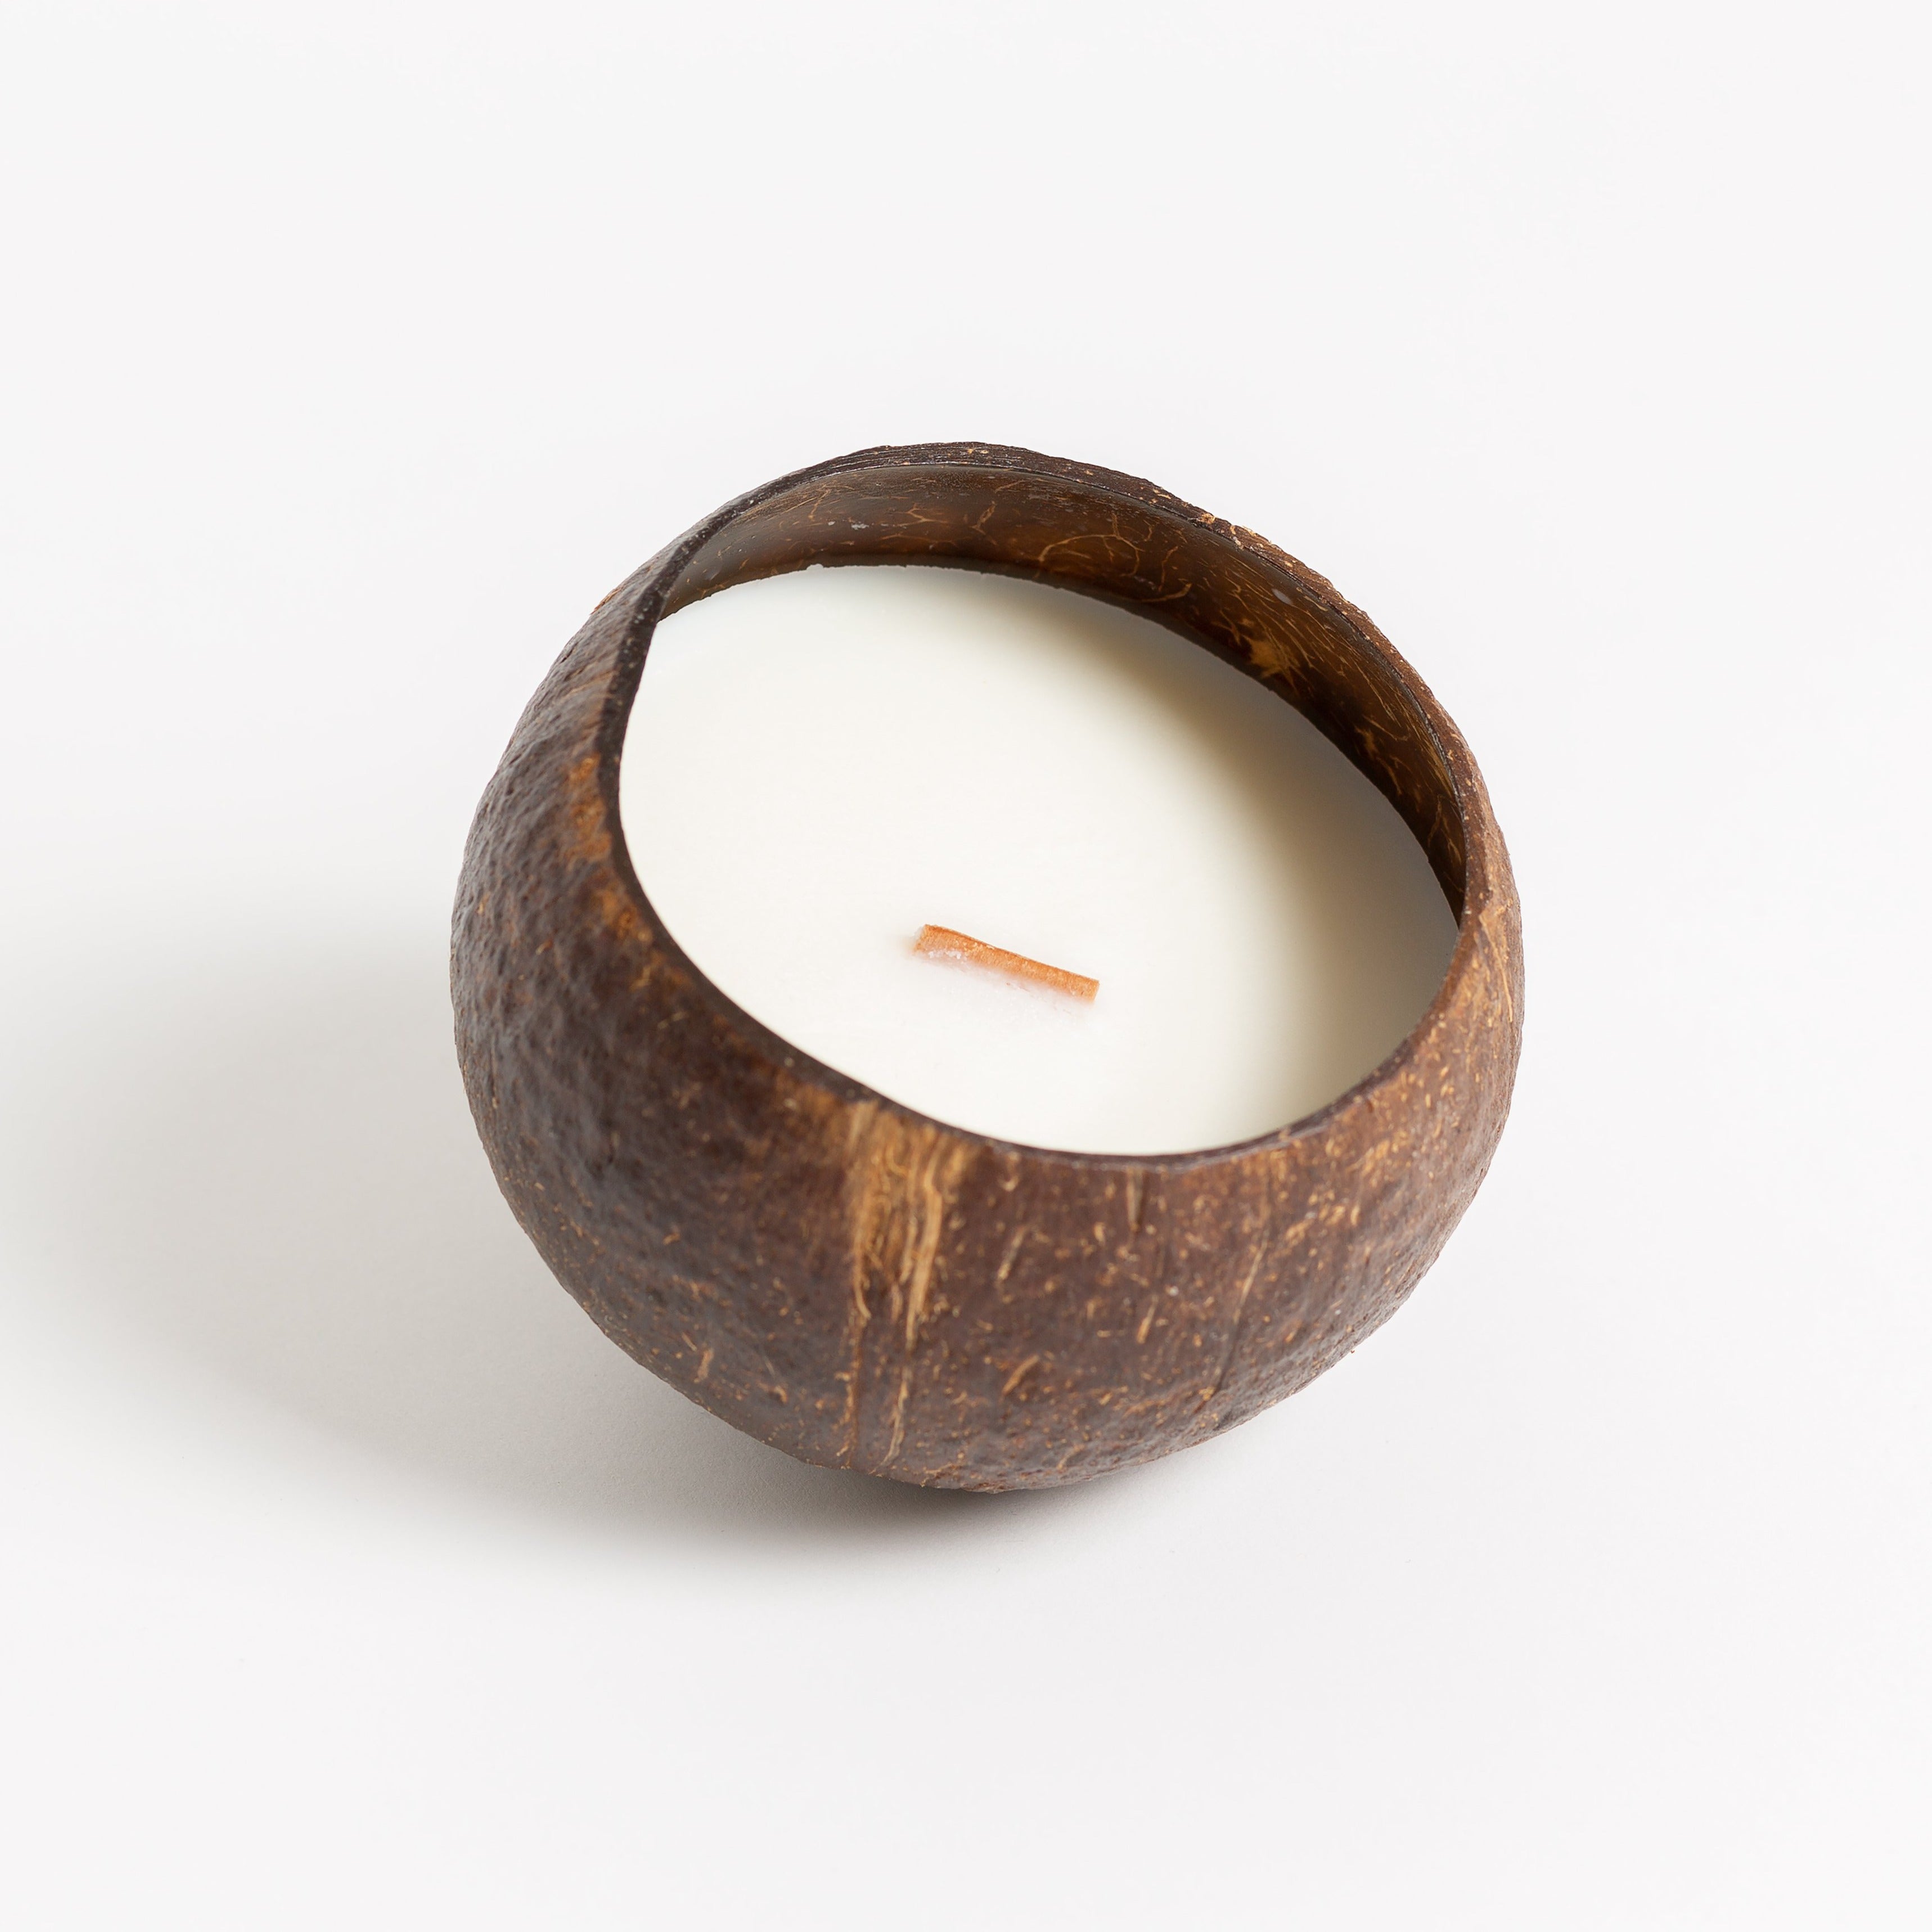 NEW: Coconut Bowl Candle